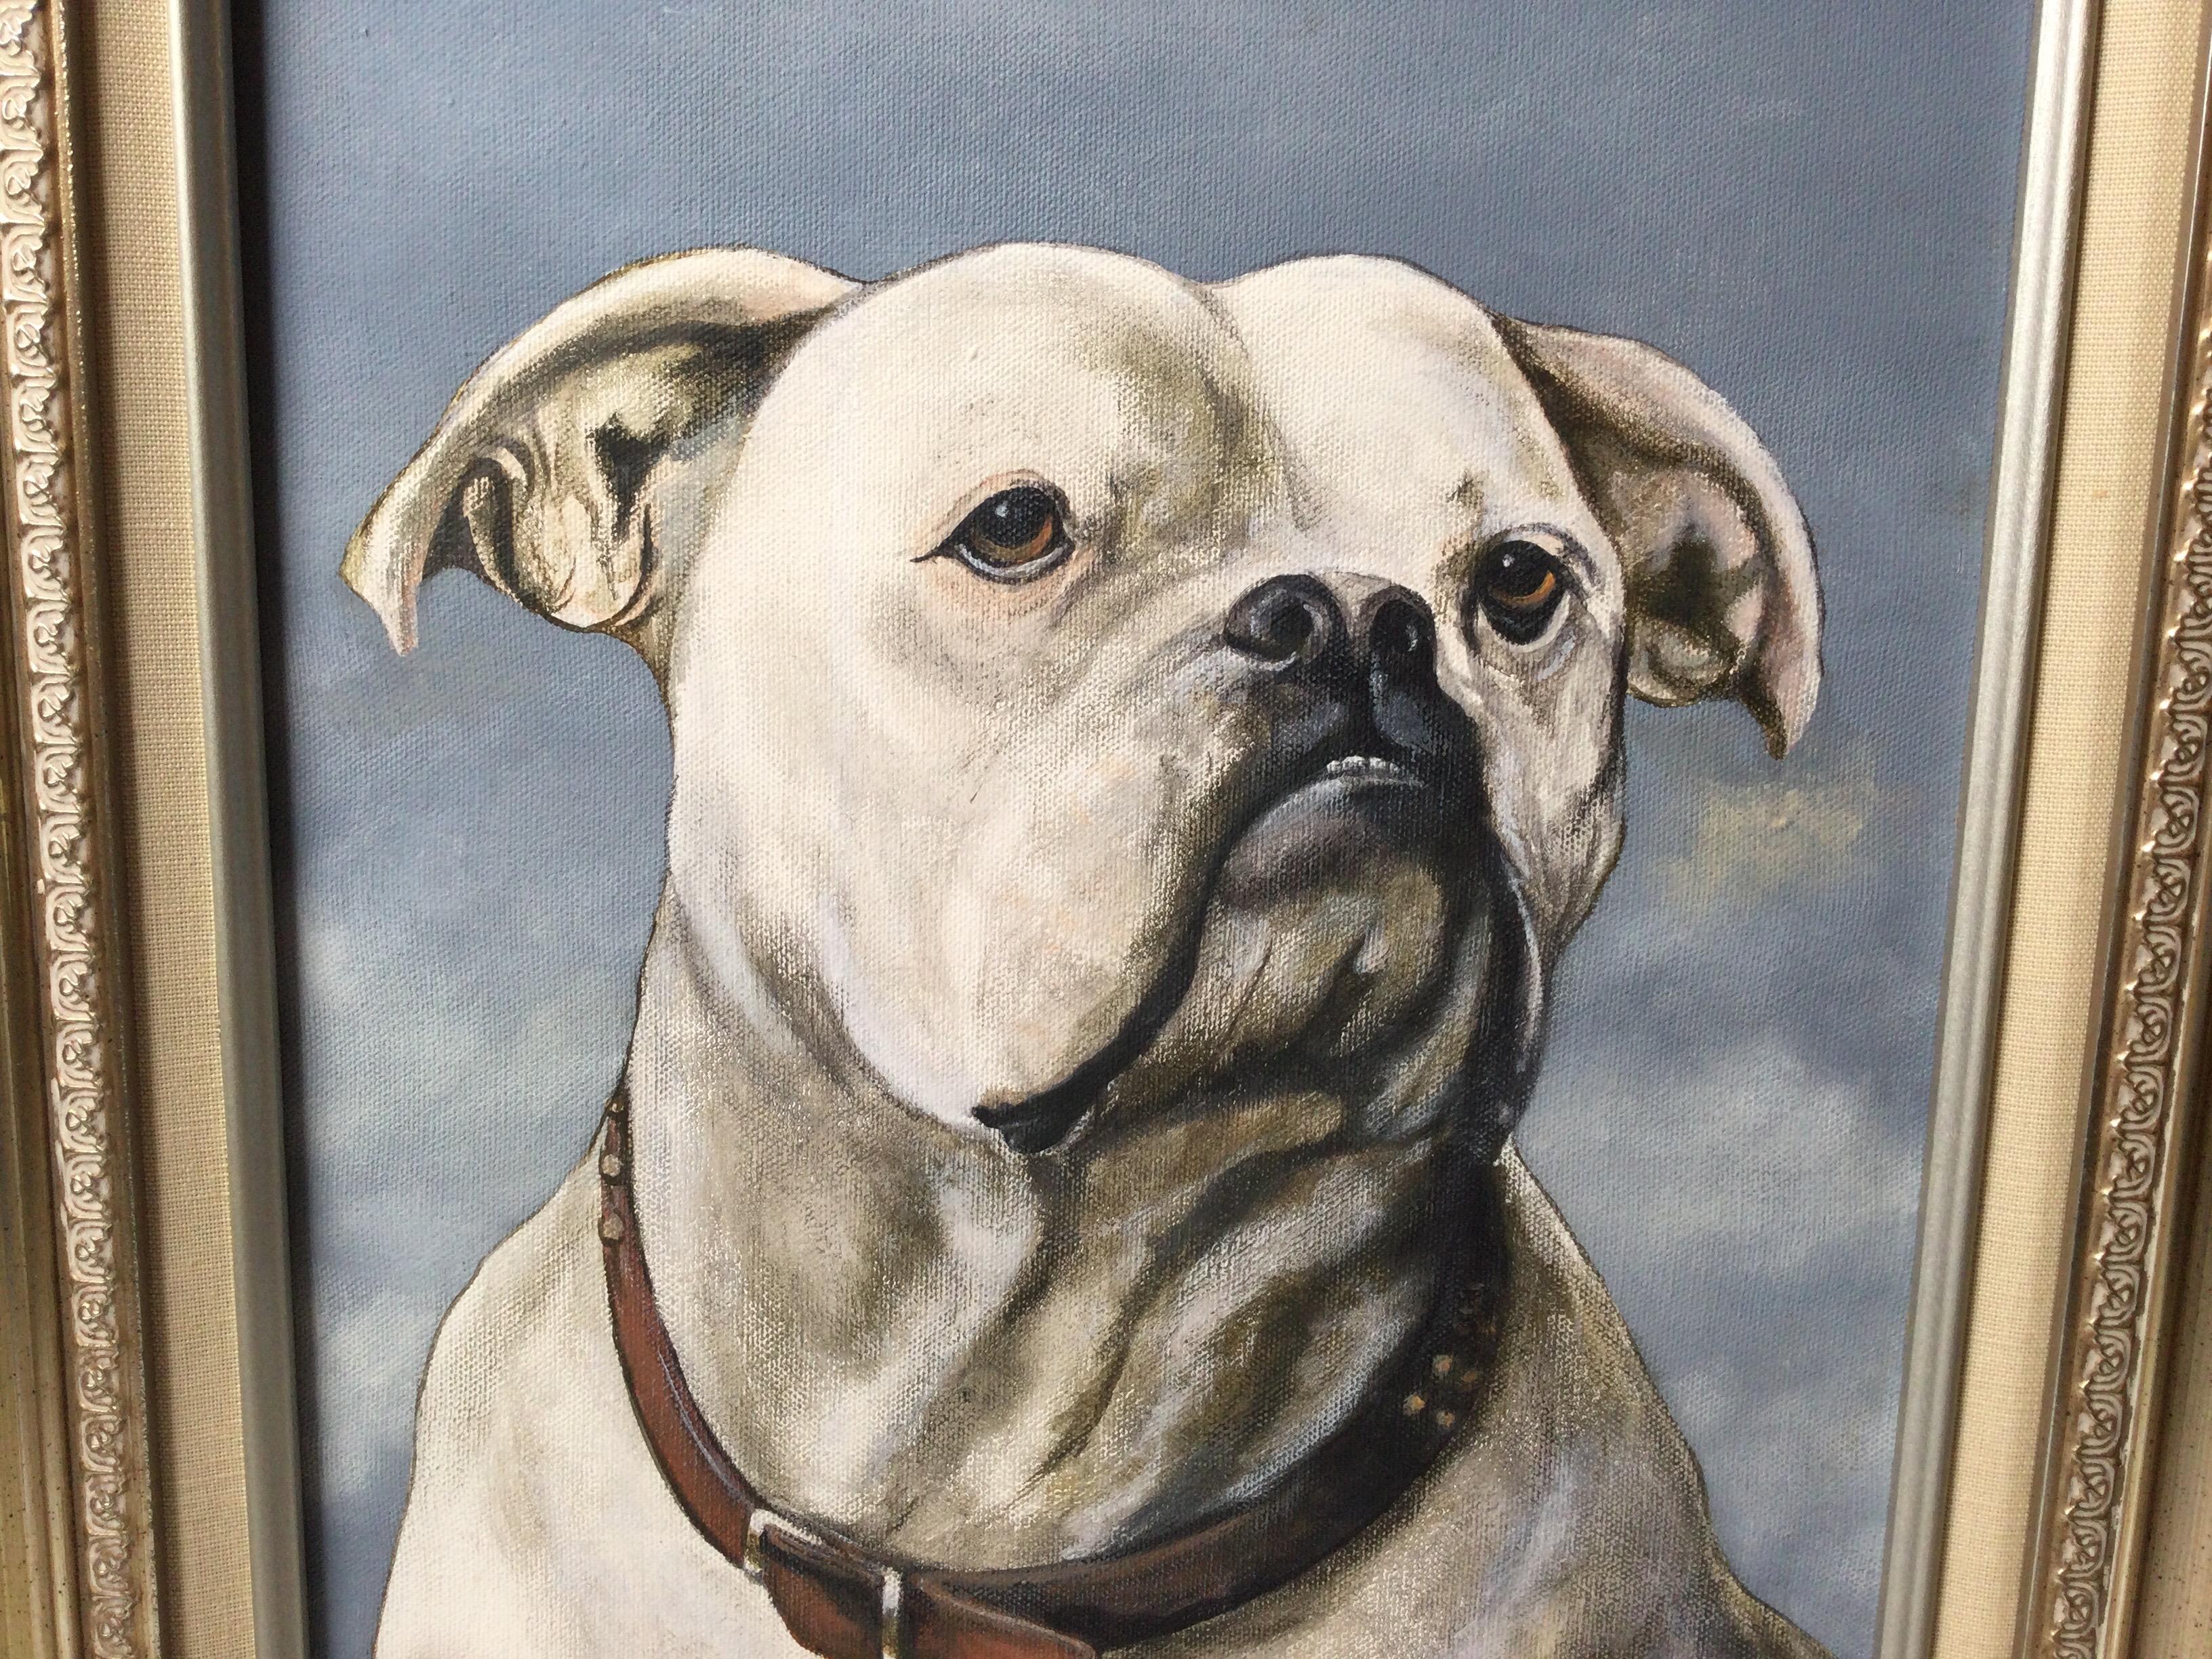 American Original Oil on Canvas of a Bull Dog Framed Signed, Dated 1999